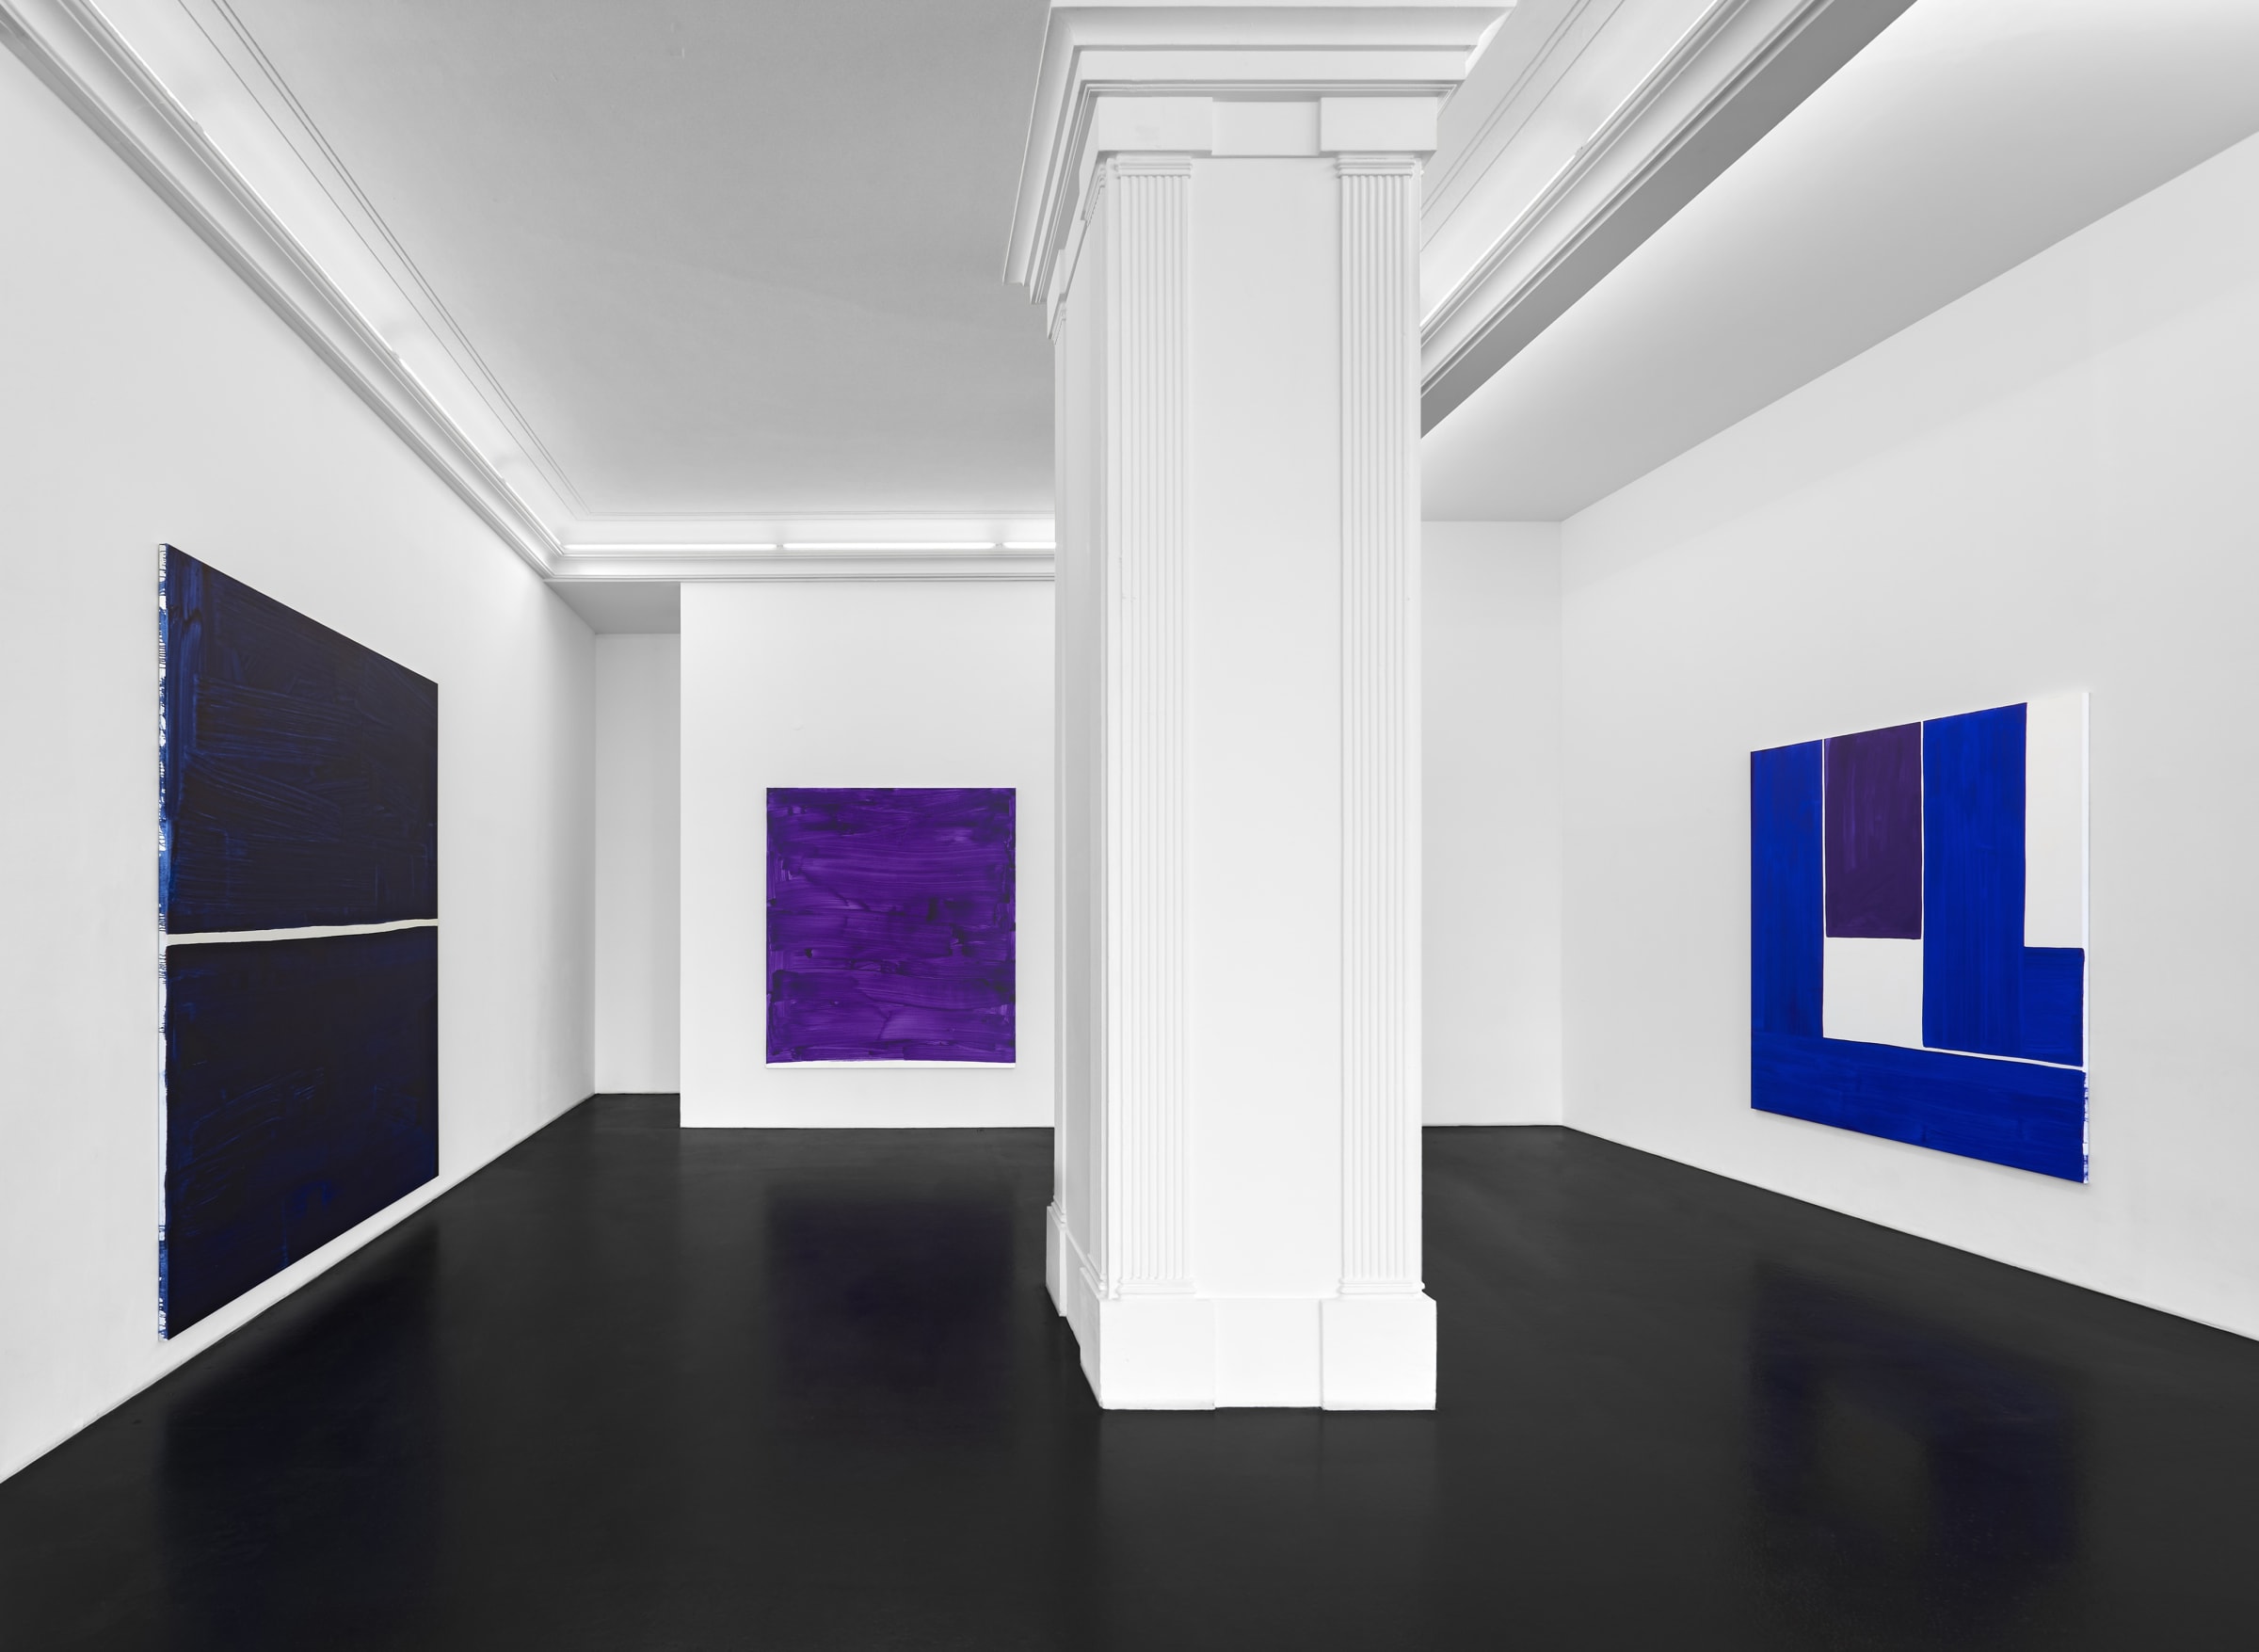 Beth Letain ultrapath Installation View April 26 – June 21, 2019 Peres Projects, Berlin Photographed by: Matthias Kolb